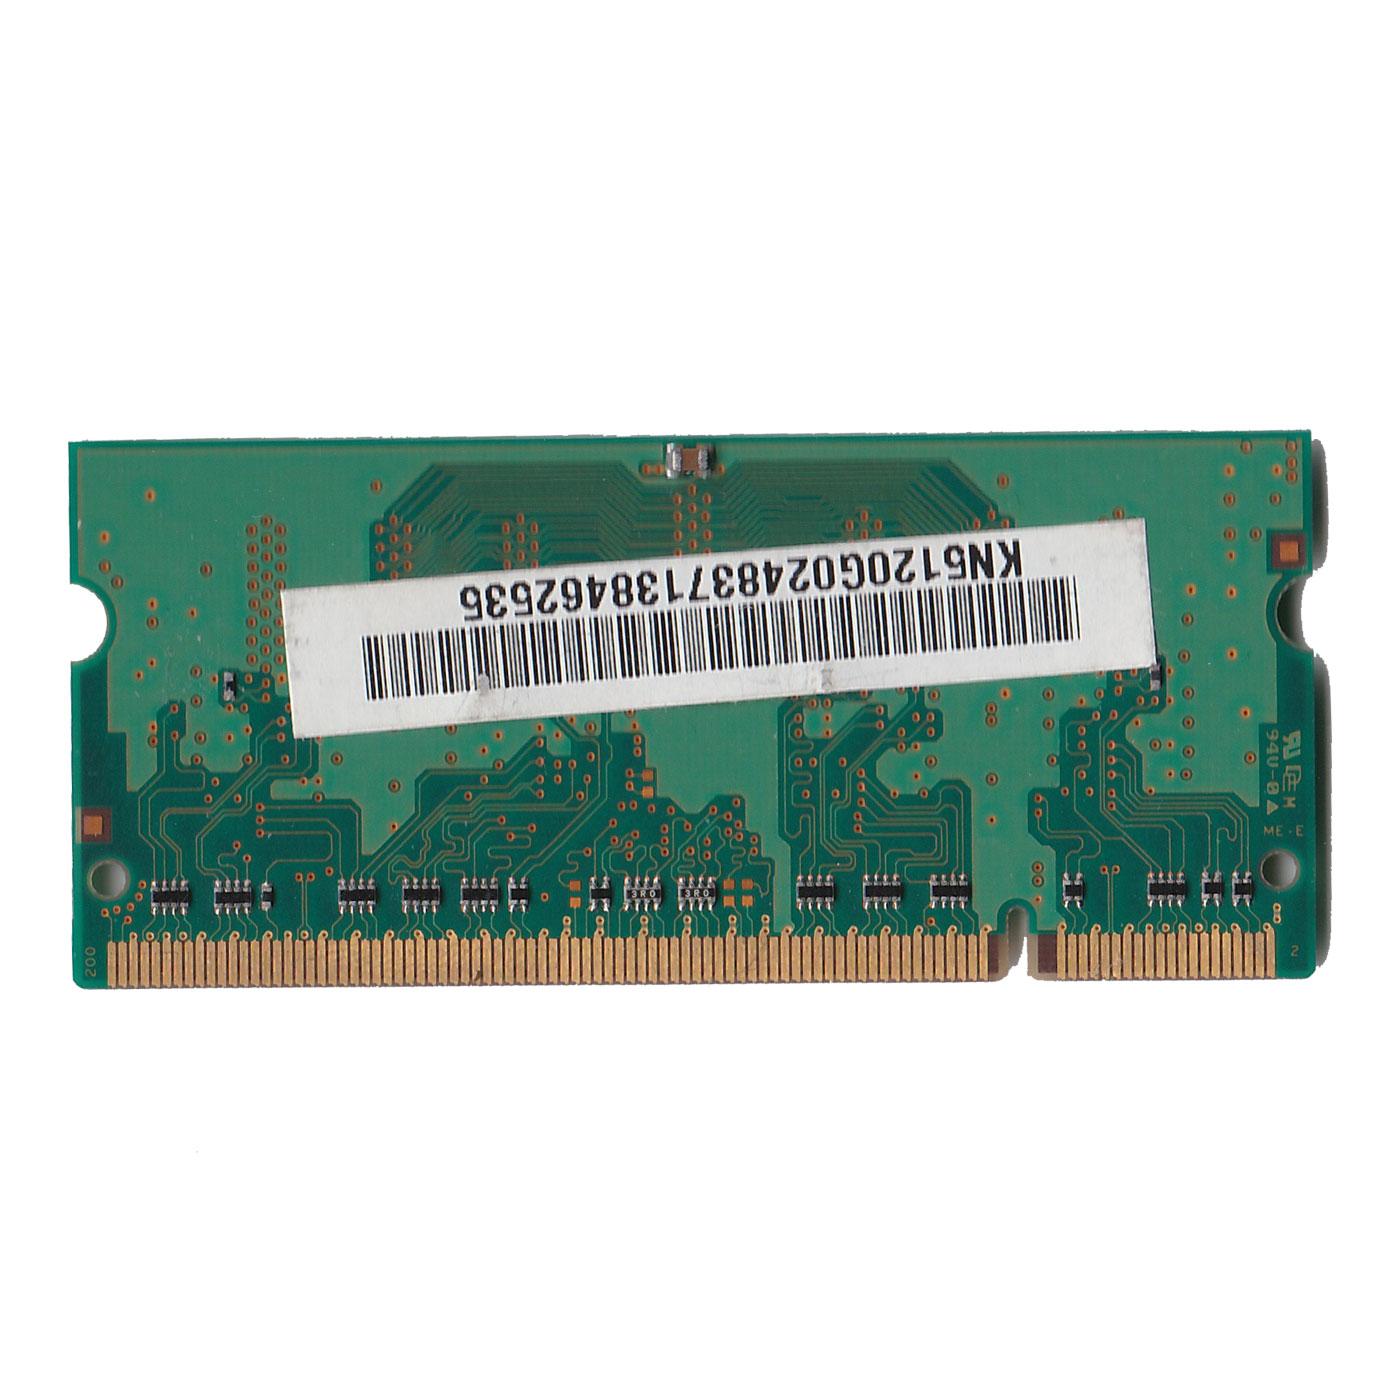 Untested Preowned HYNIX 2RX16 PC2-5300S-555-12 AB 512MB Laptop Memory Module - Unbeatable Price